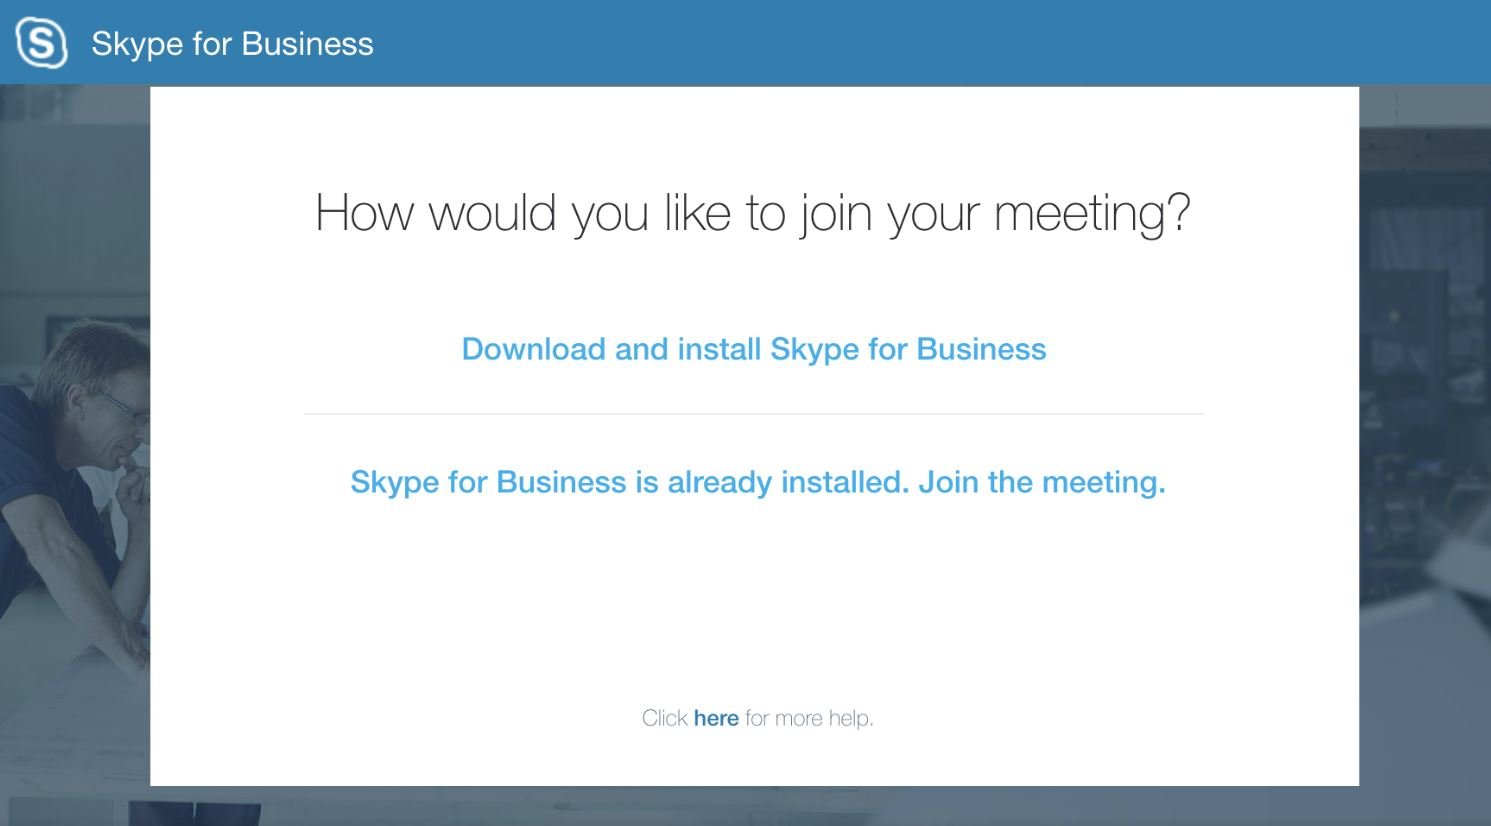 download skype for business mac office 365